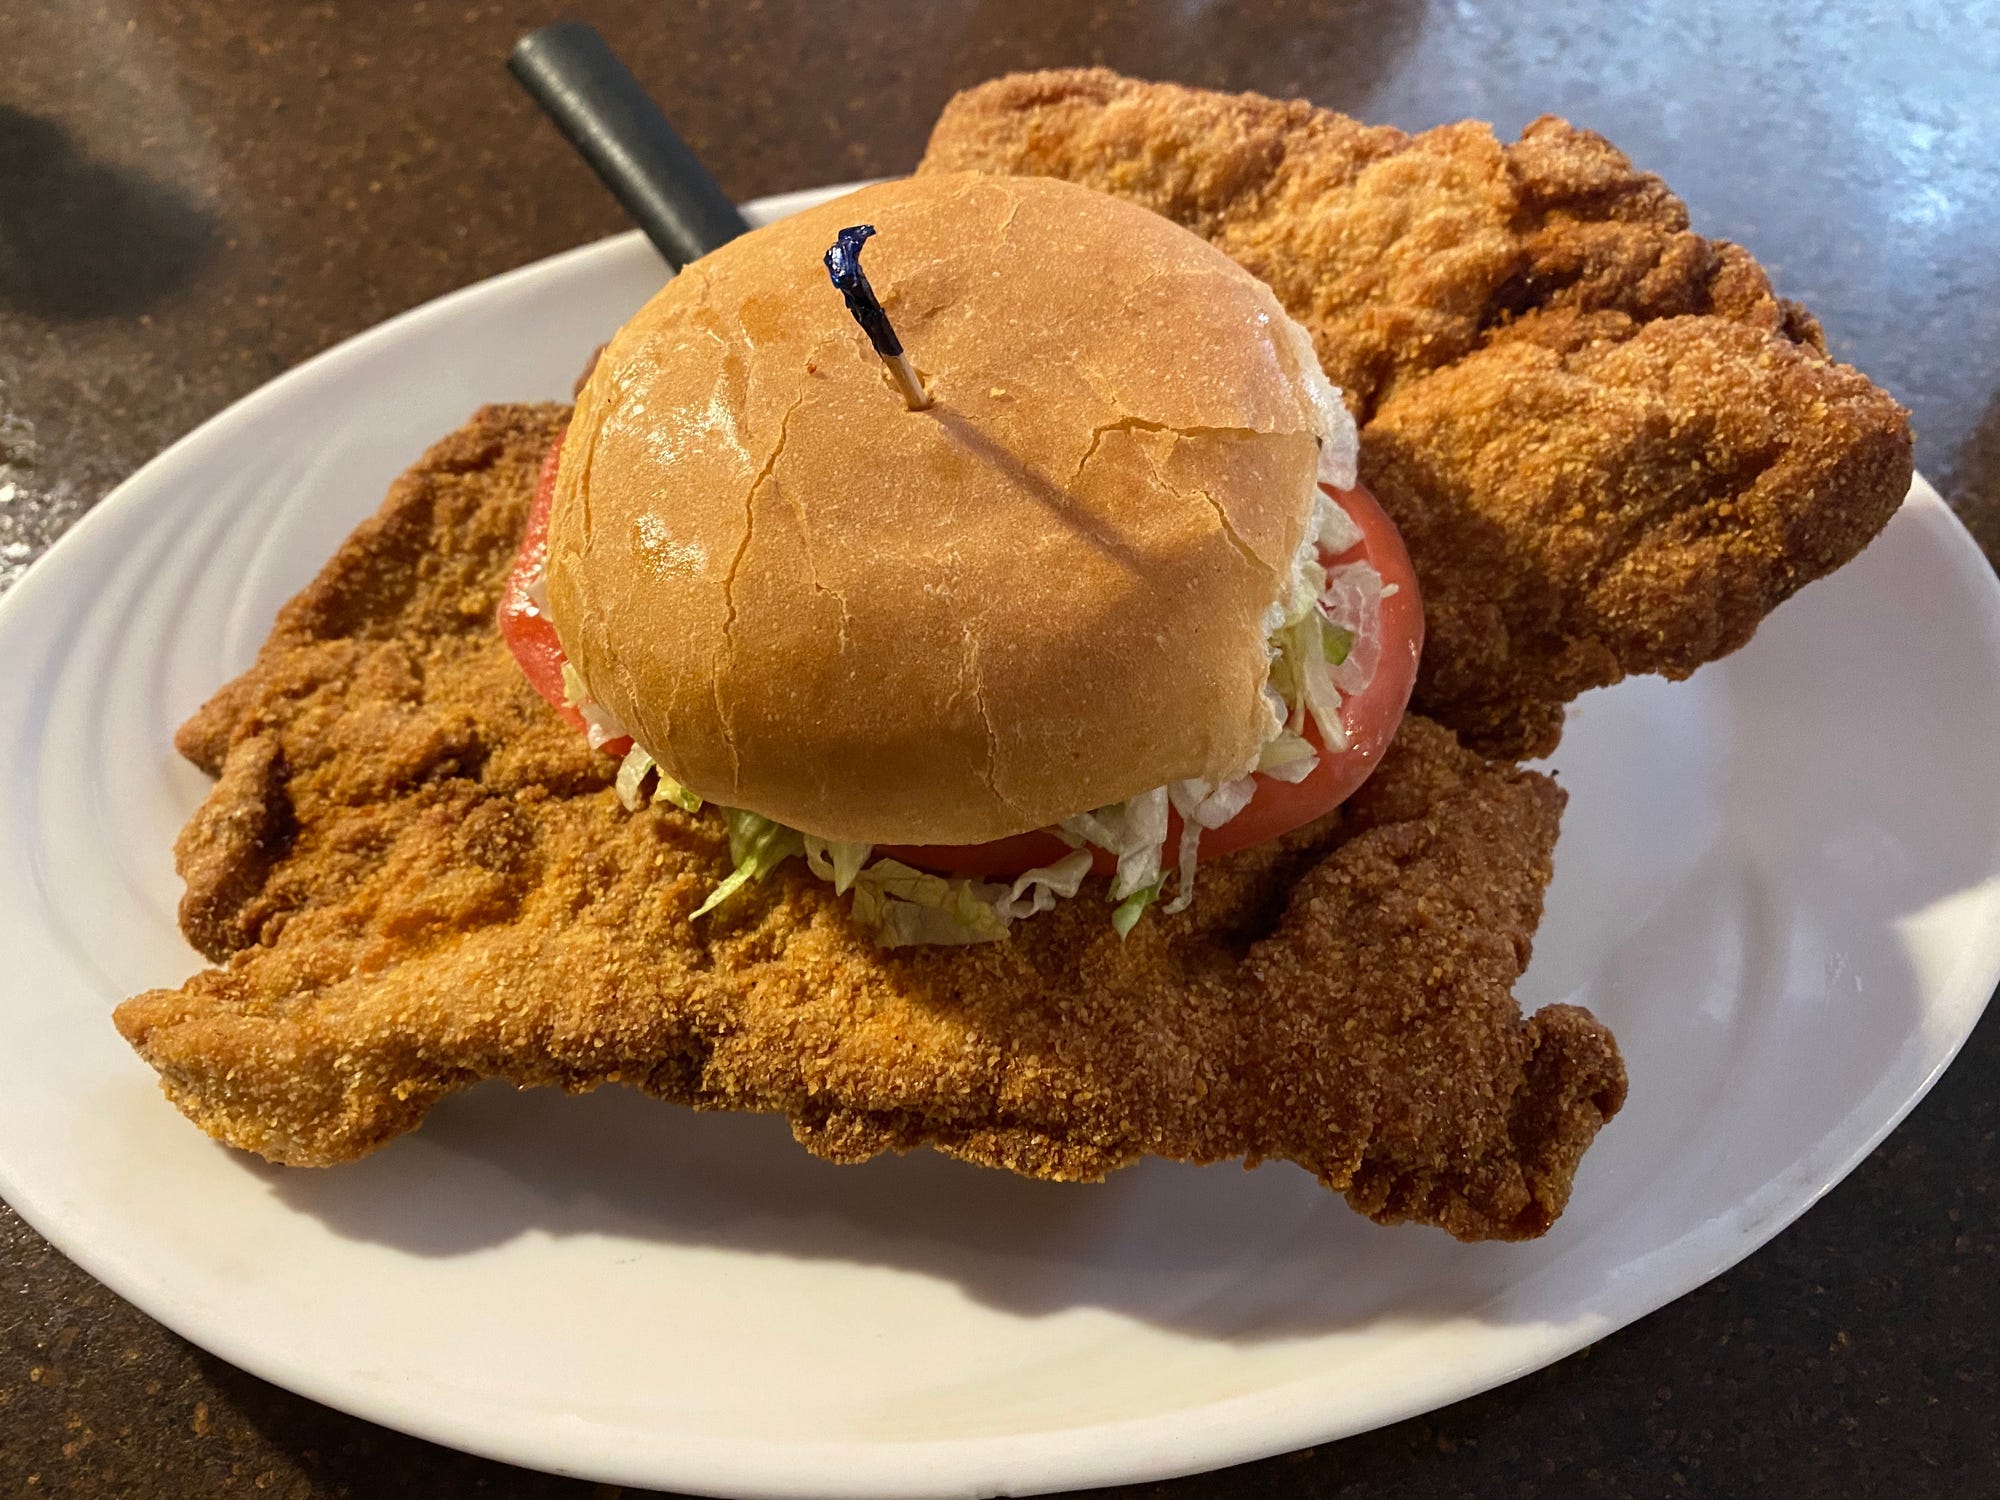 <p>Indiana claims to have the best pork tenderloin in the nation. Put it to the test by tasting a Hoosier sandwich, or a breaded tenderloin on bread. Purists insist on trying it with only a few dill pickles and some mustard, but you can also get it with lettuce, tomato, and other fixings.</p>